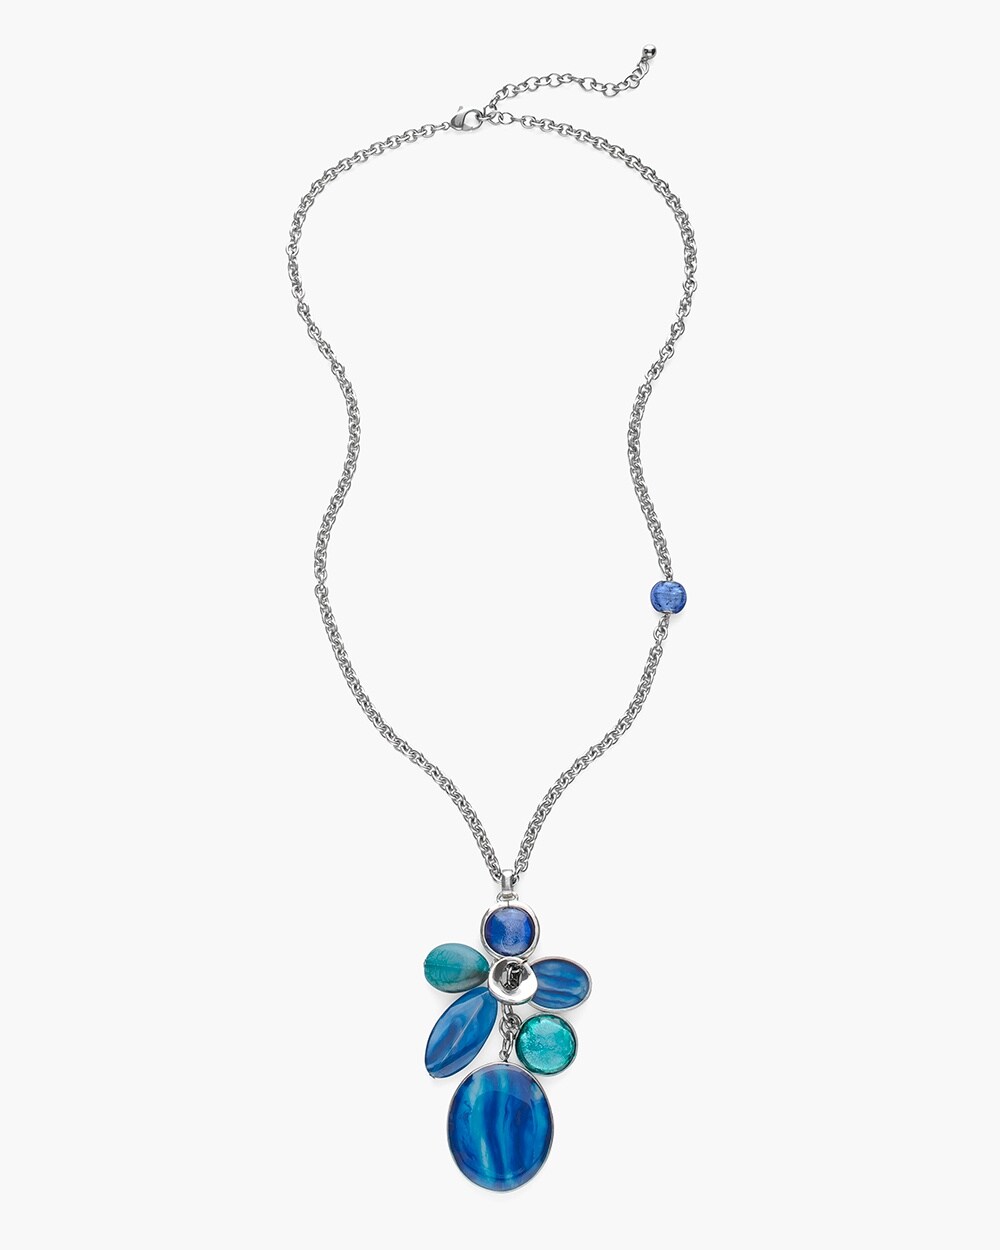 Blue and Silver-Tone Charm Pendant Necklace